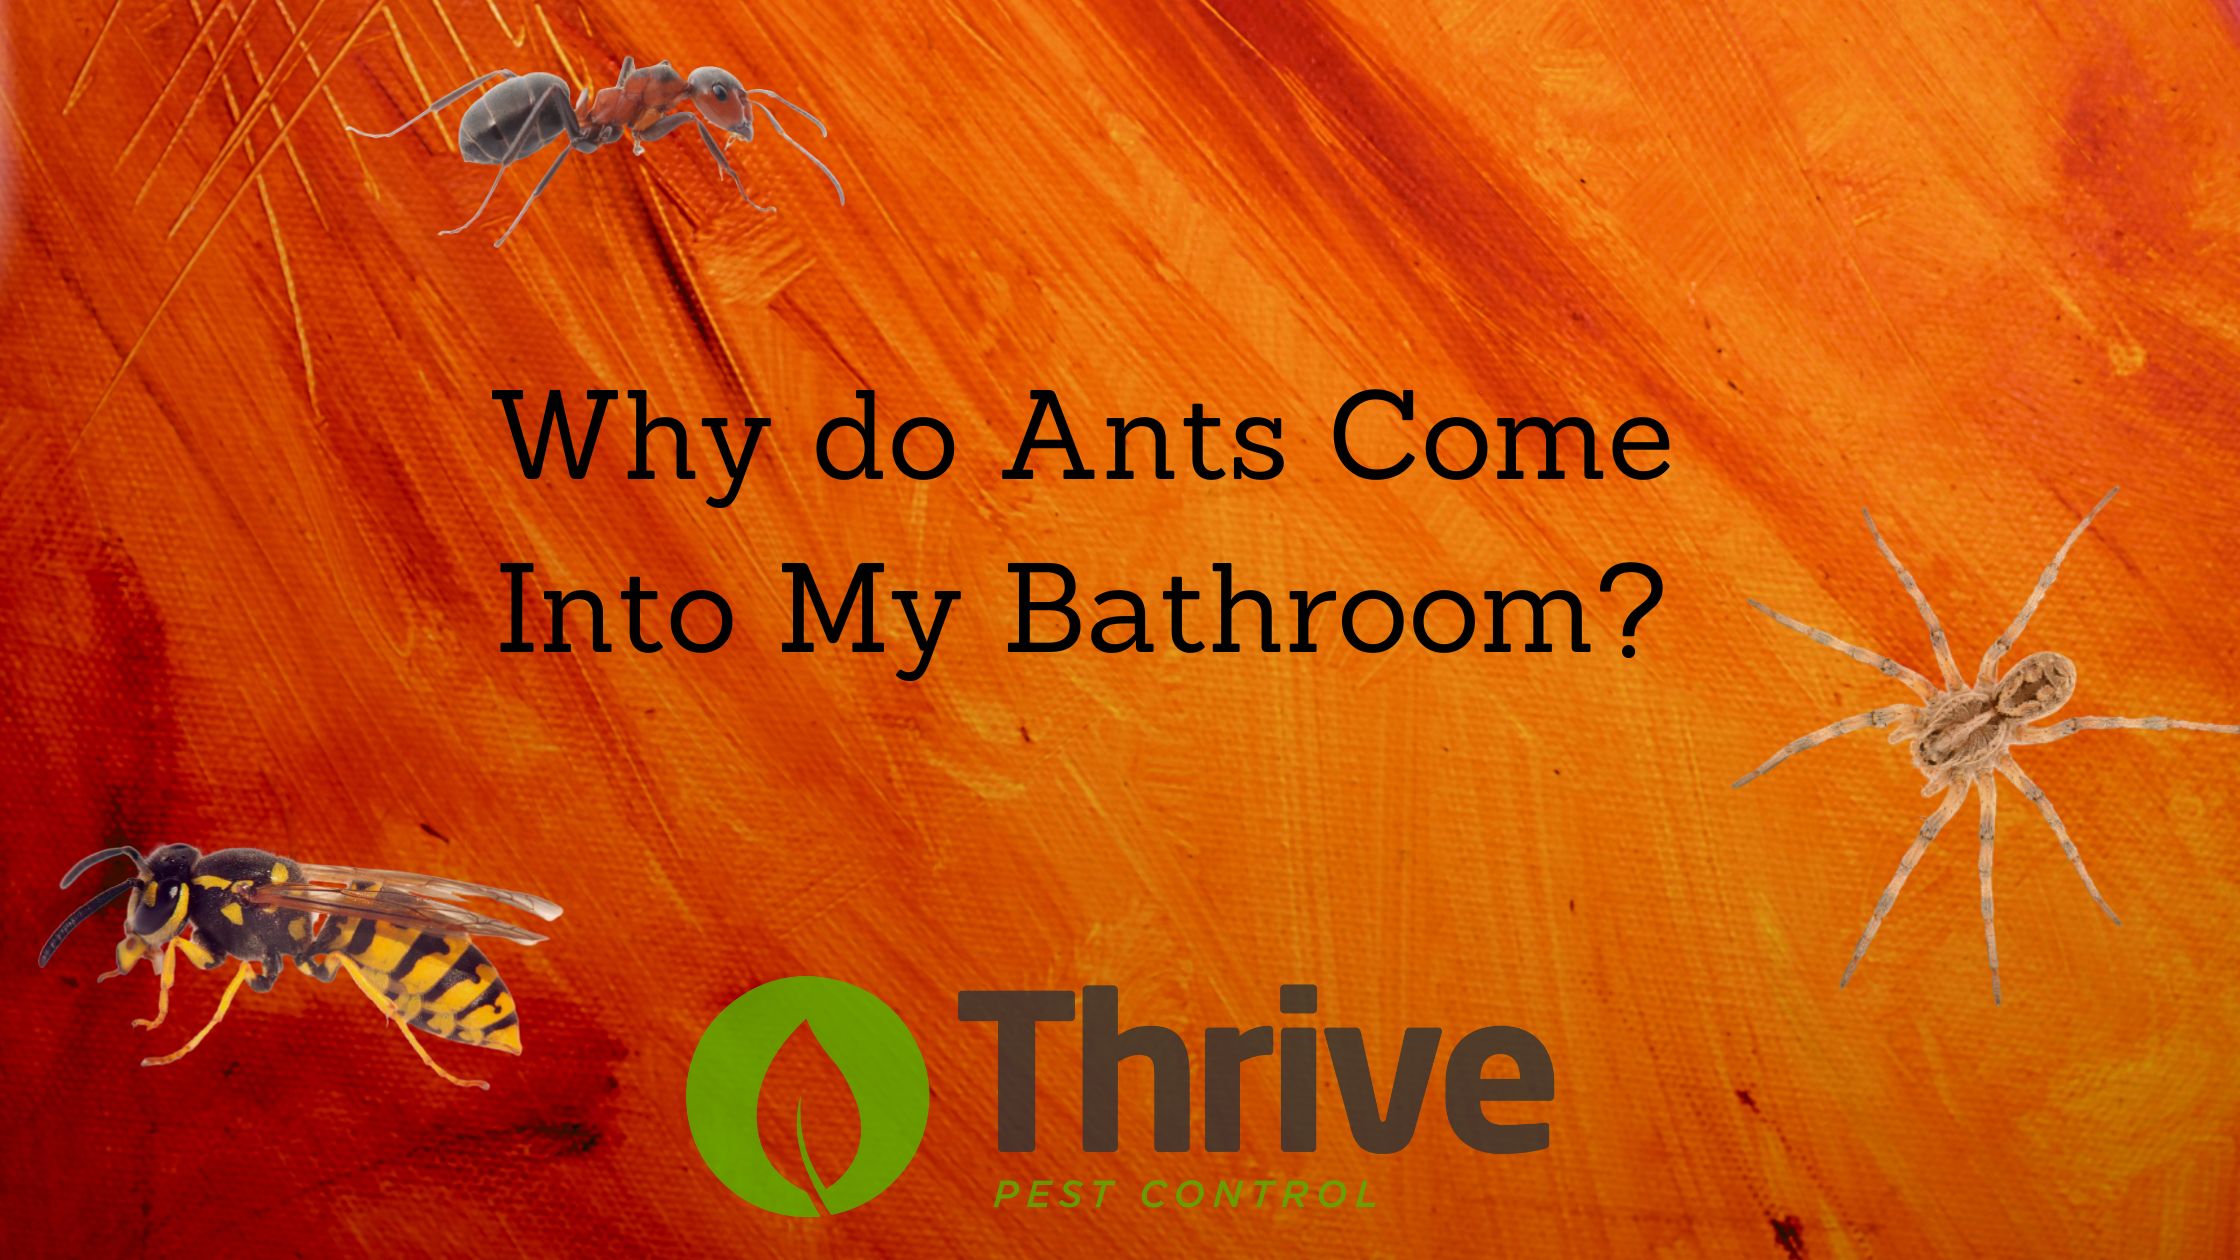 Why do Ants Come into My Bathroom